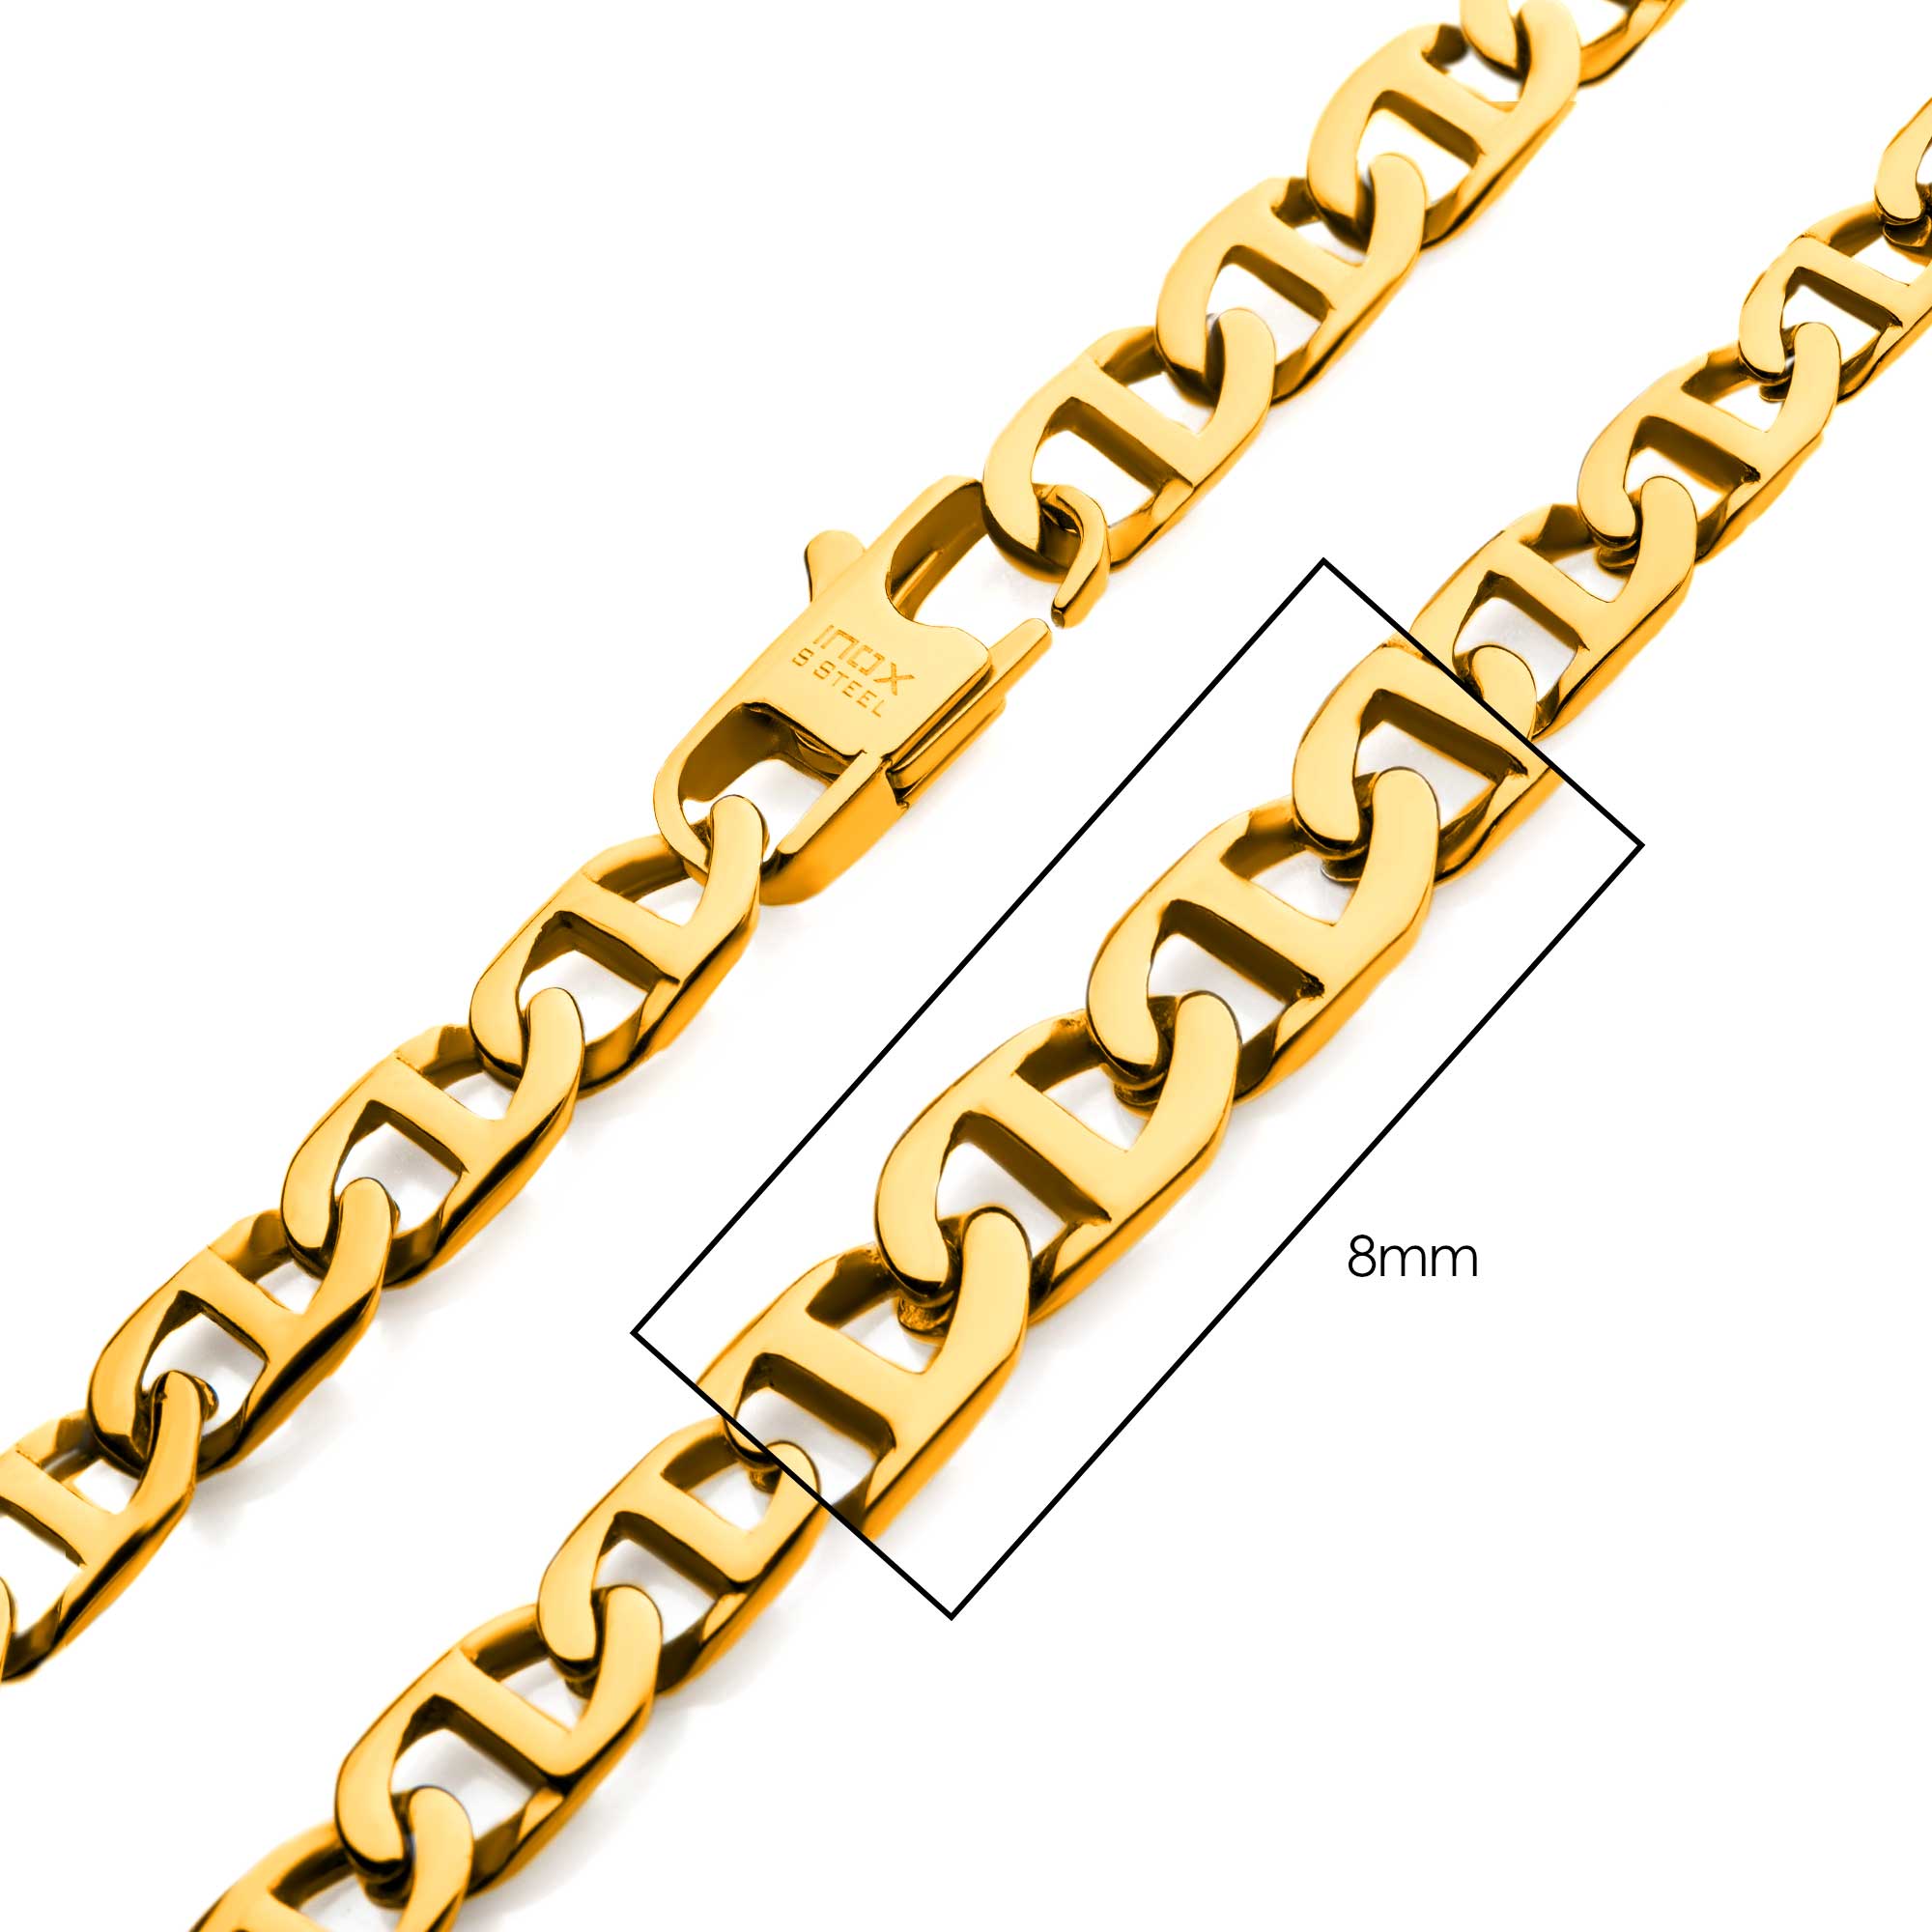 8mm 18K Gold Plated Mariner Link Chain Spath Jewelers Bartow, FL